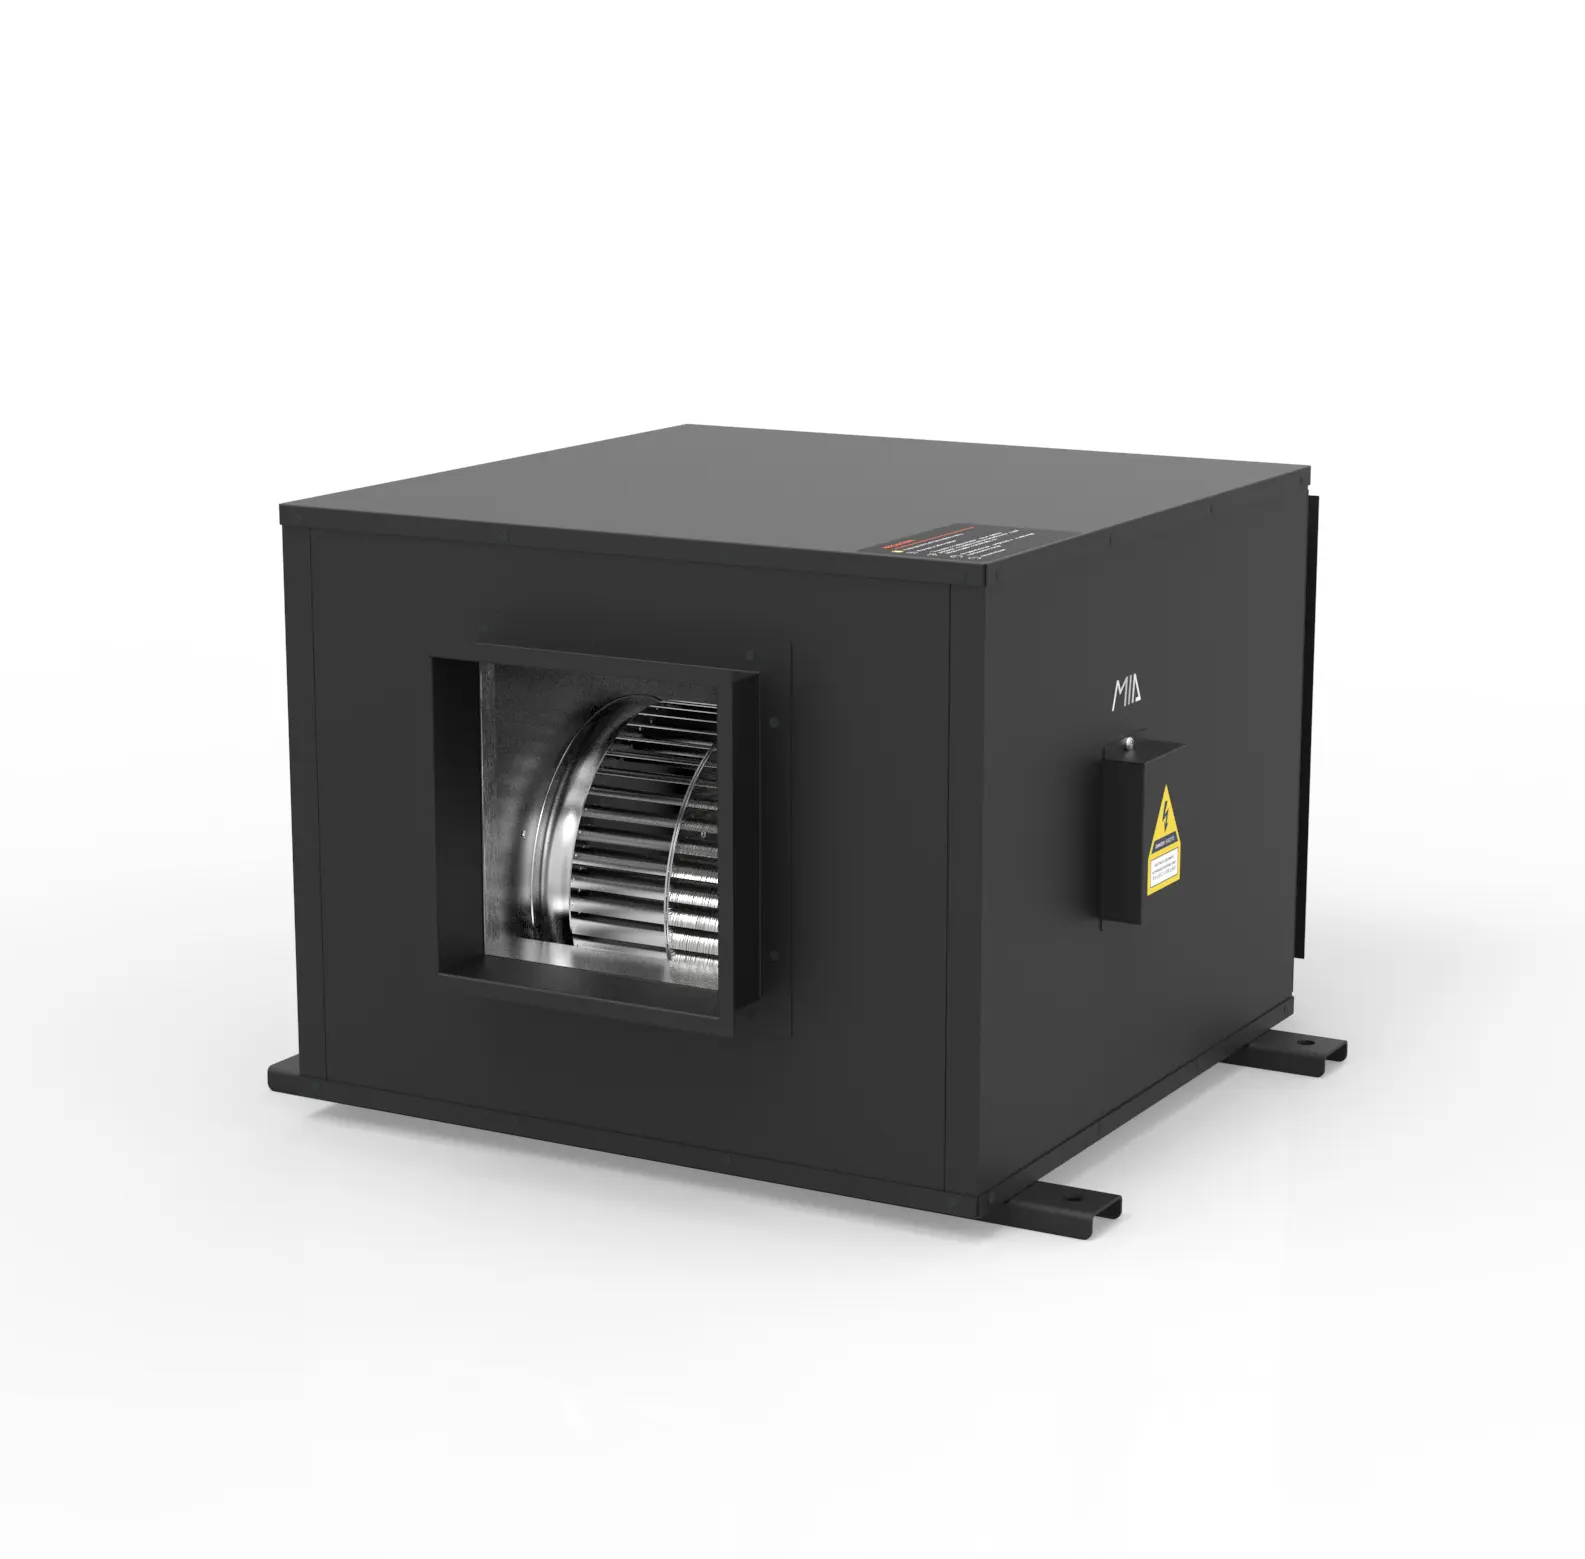 MIAVENTILATION CE Certificate 5000 cmh 110V Ventilation Fan with large air pressure fan air duct ventilation with EC motor